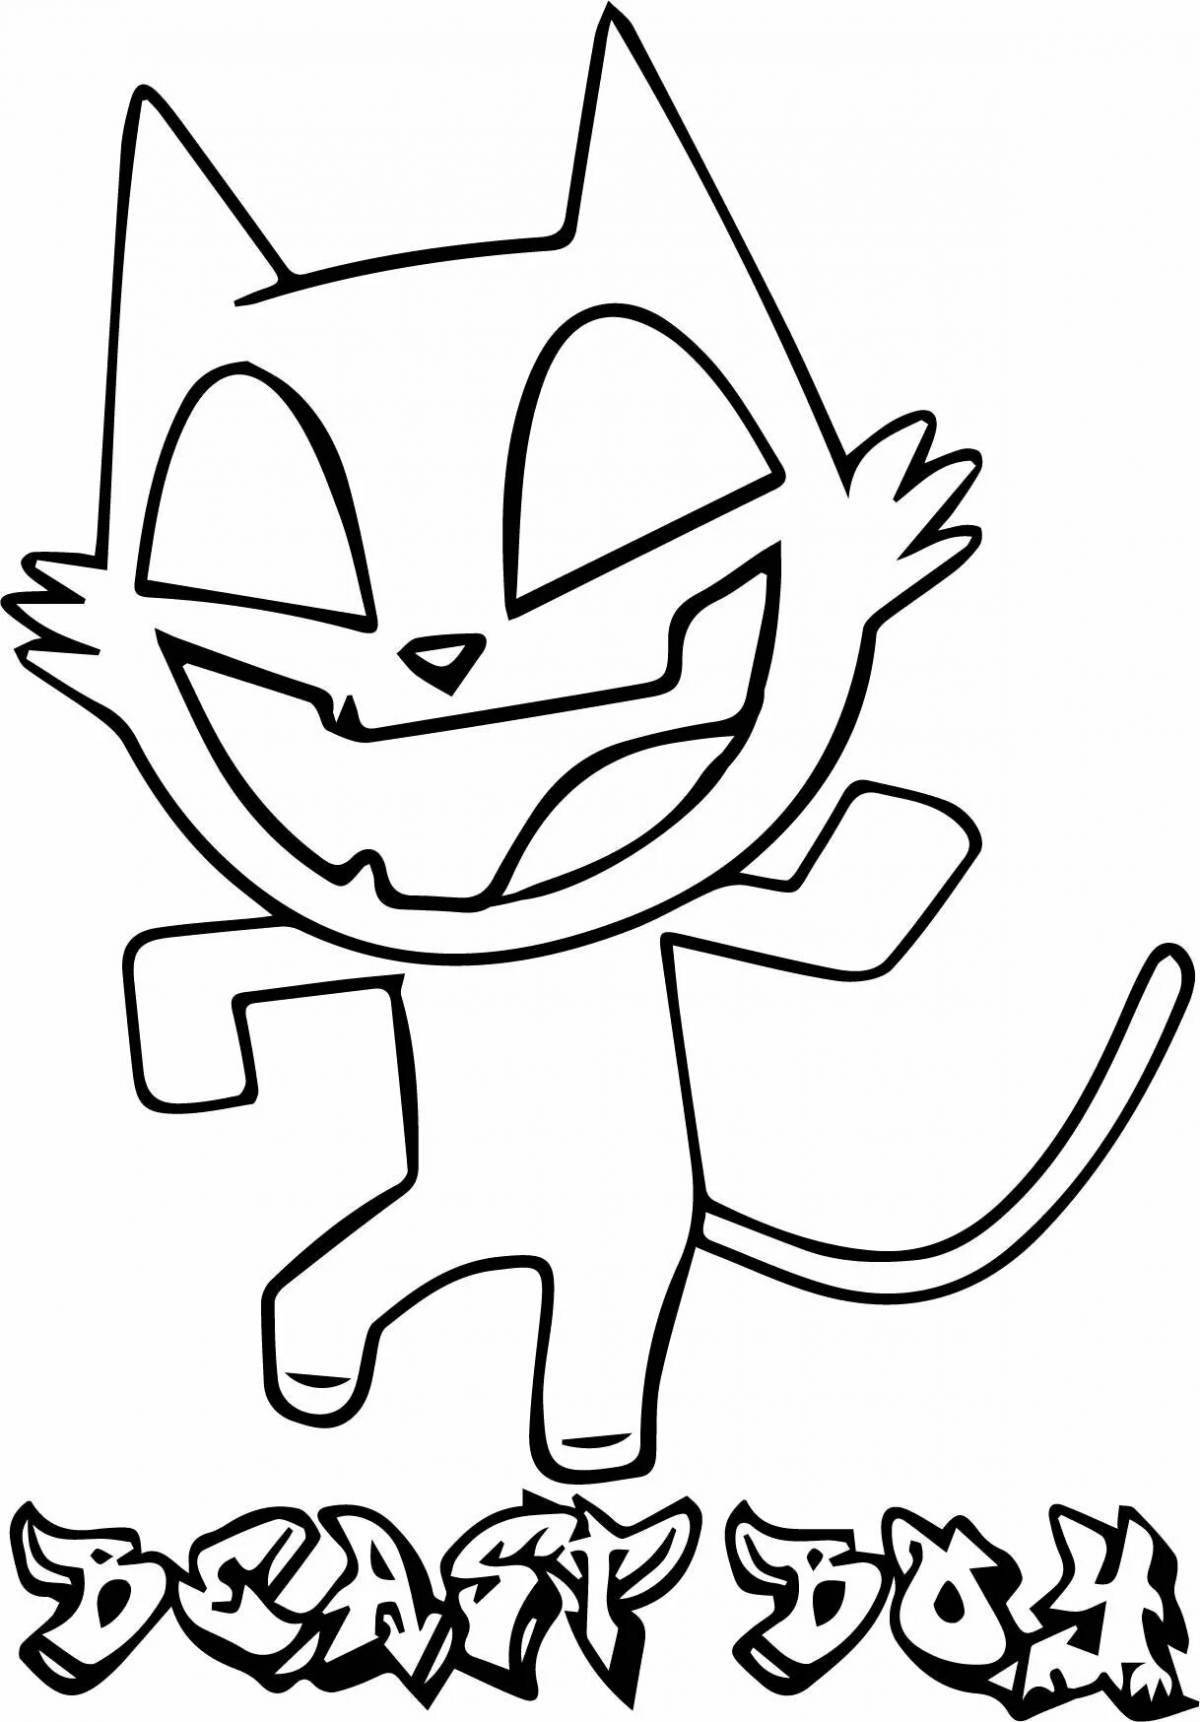 Silly cartoon cat coloring page